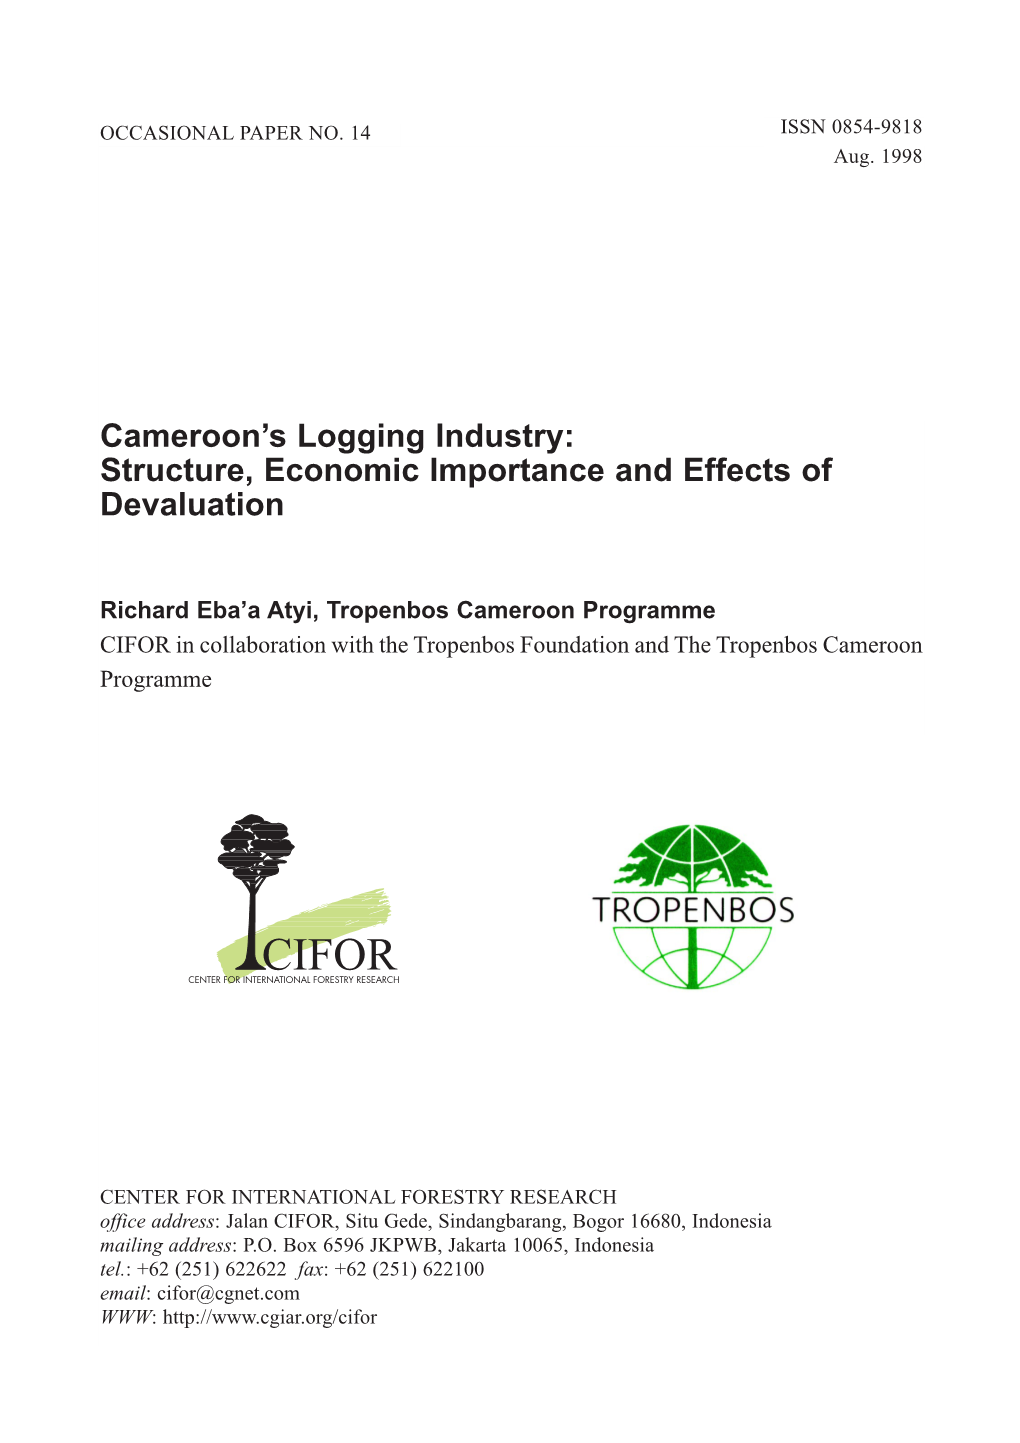 Cameroon's Logging Industry: Structure, Economic Importance and Effects of Devaluation